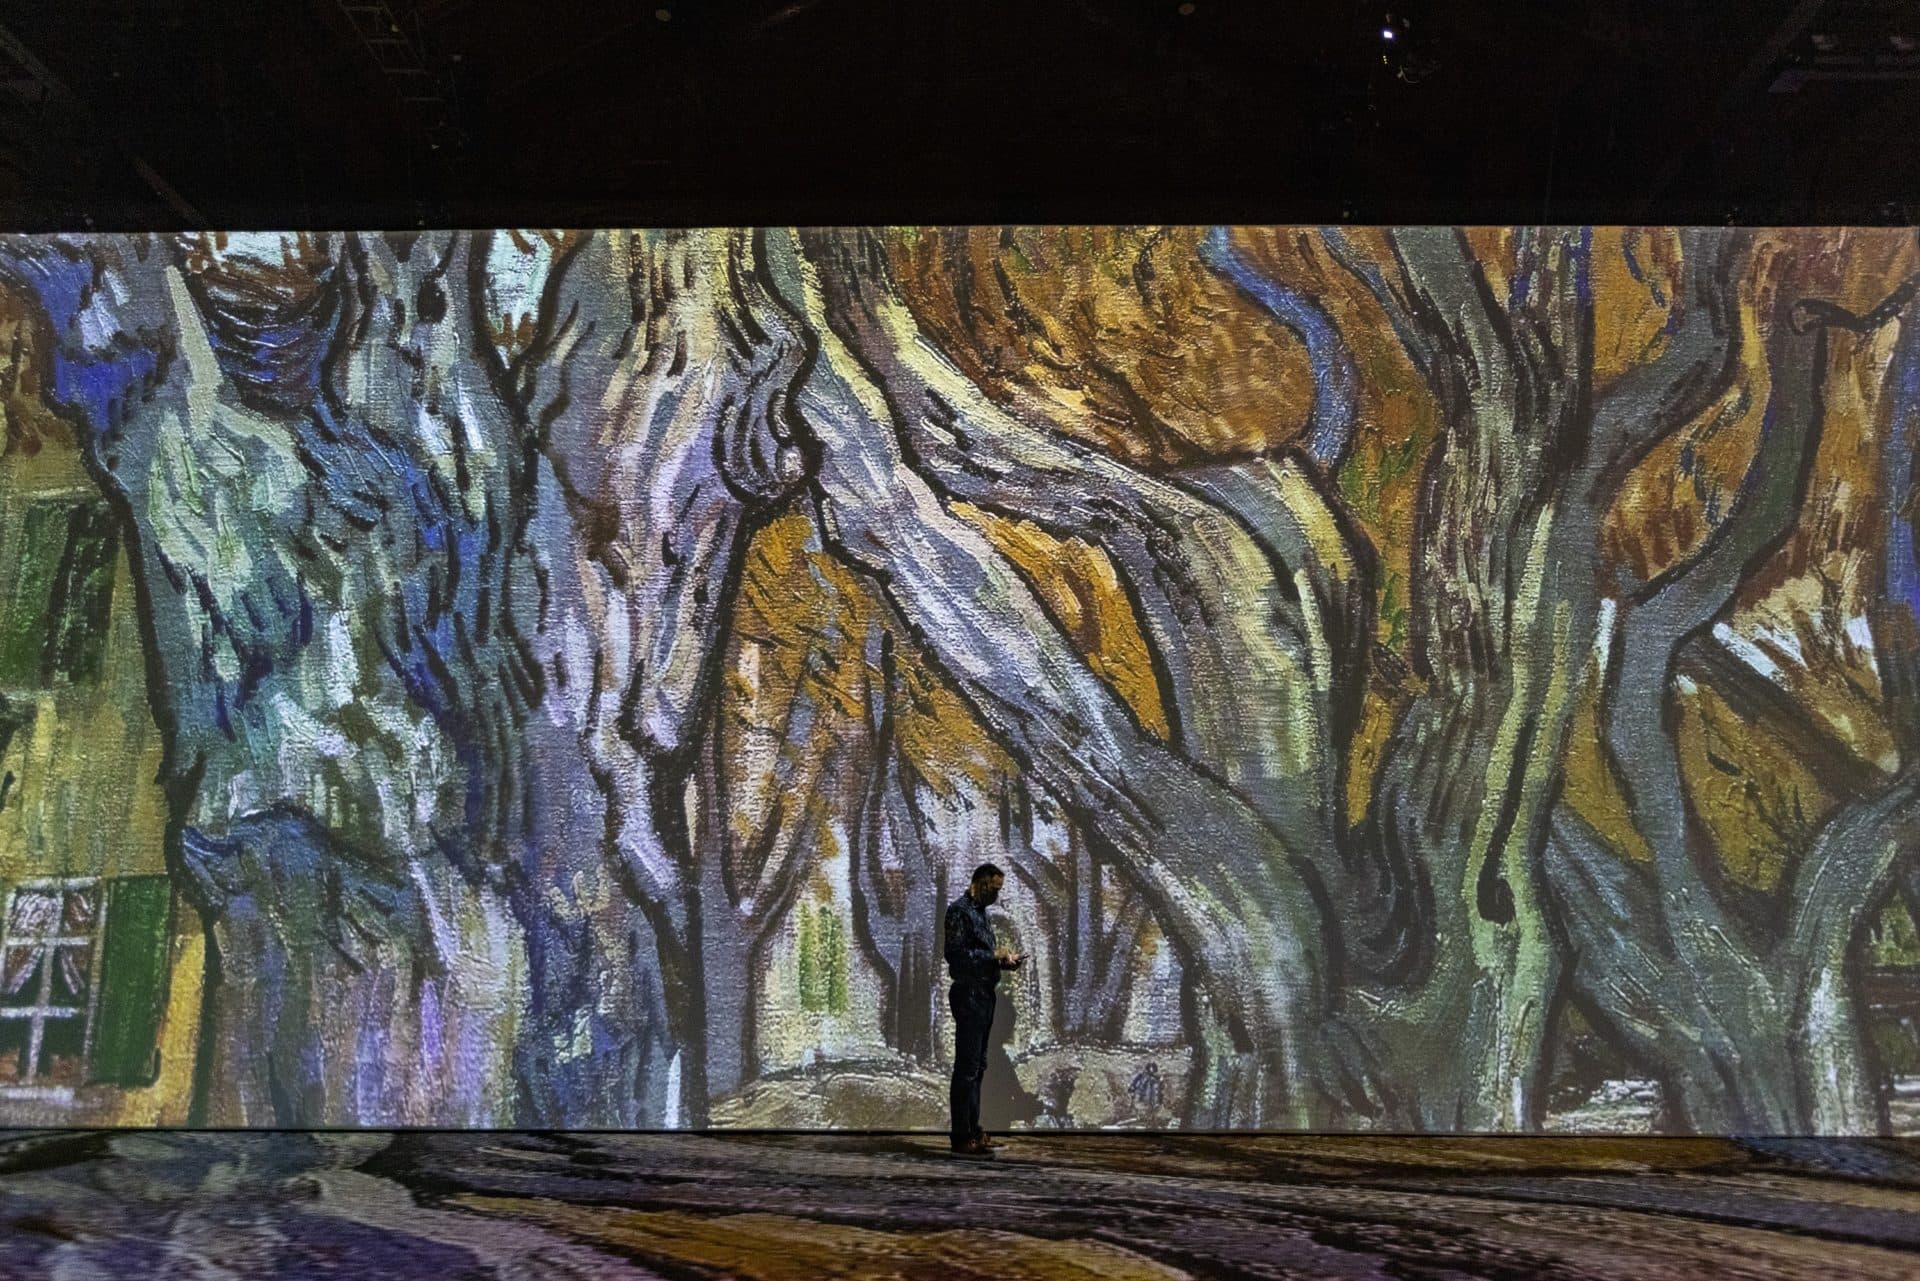 Vincent van Gogh’s “The Road Menders” is projected onto the walls and floor during a press preview of “Imagine Van Gogh” at the SoWa Power Station in the South End. (Jesse Costa/WBUR)